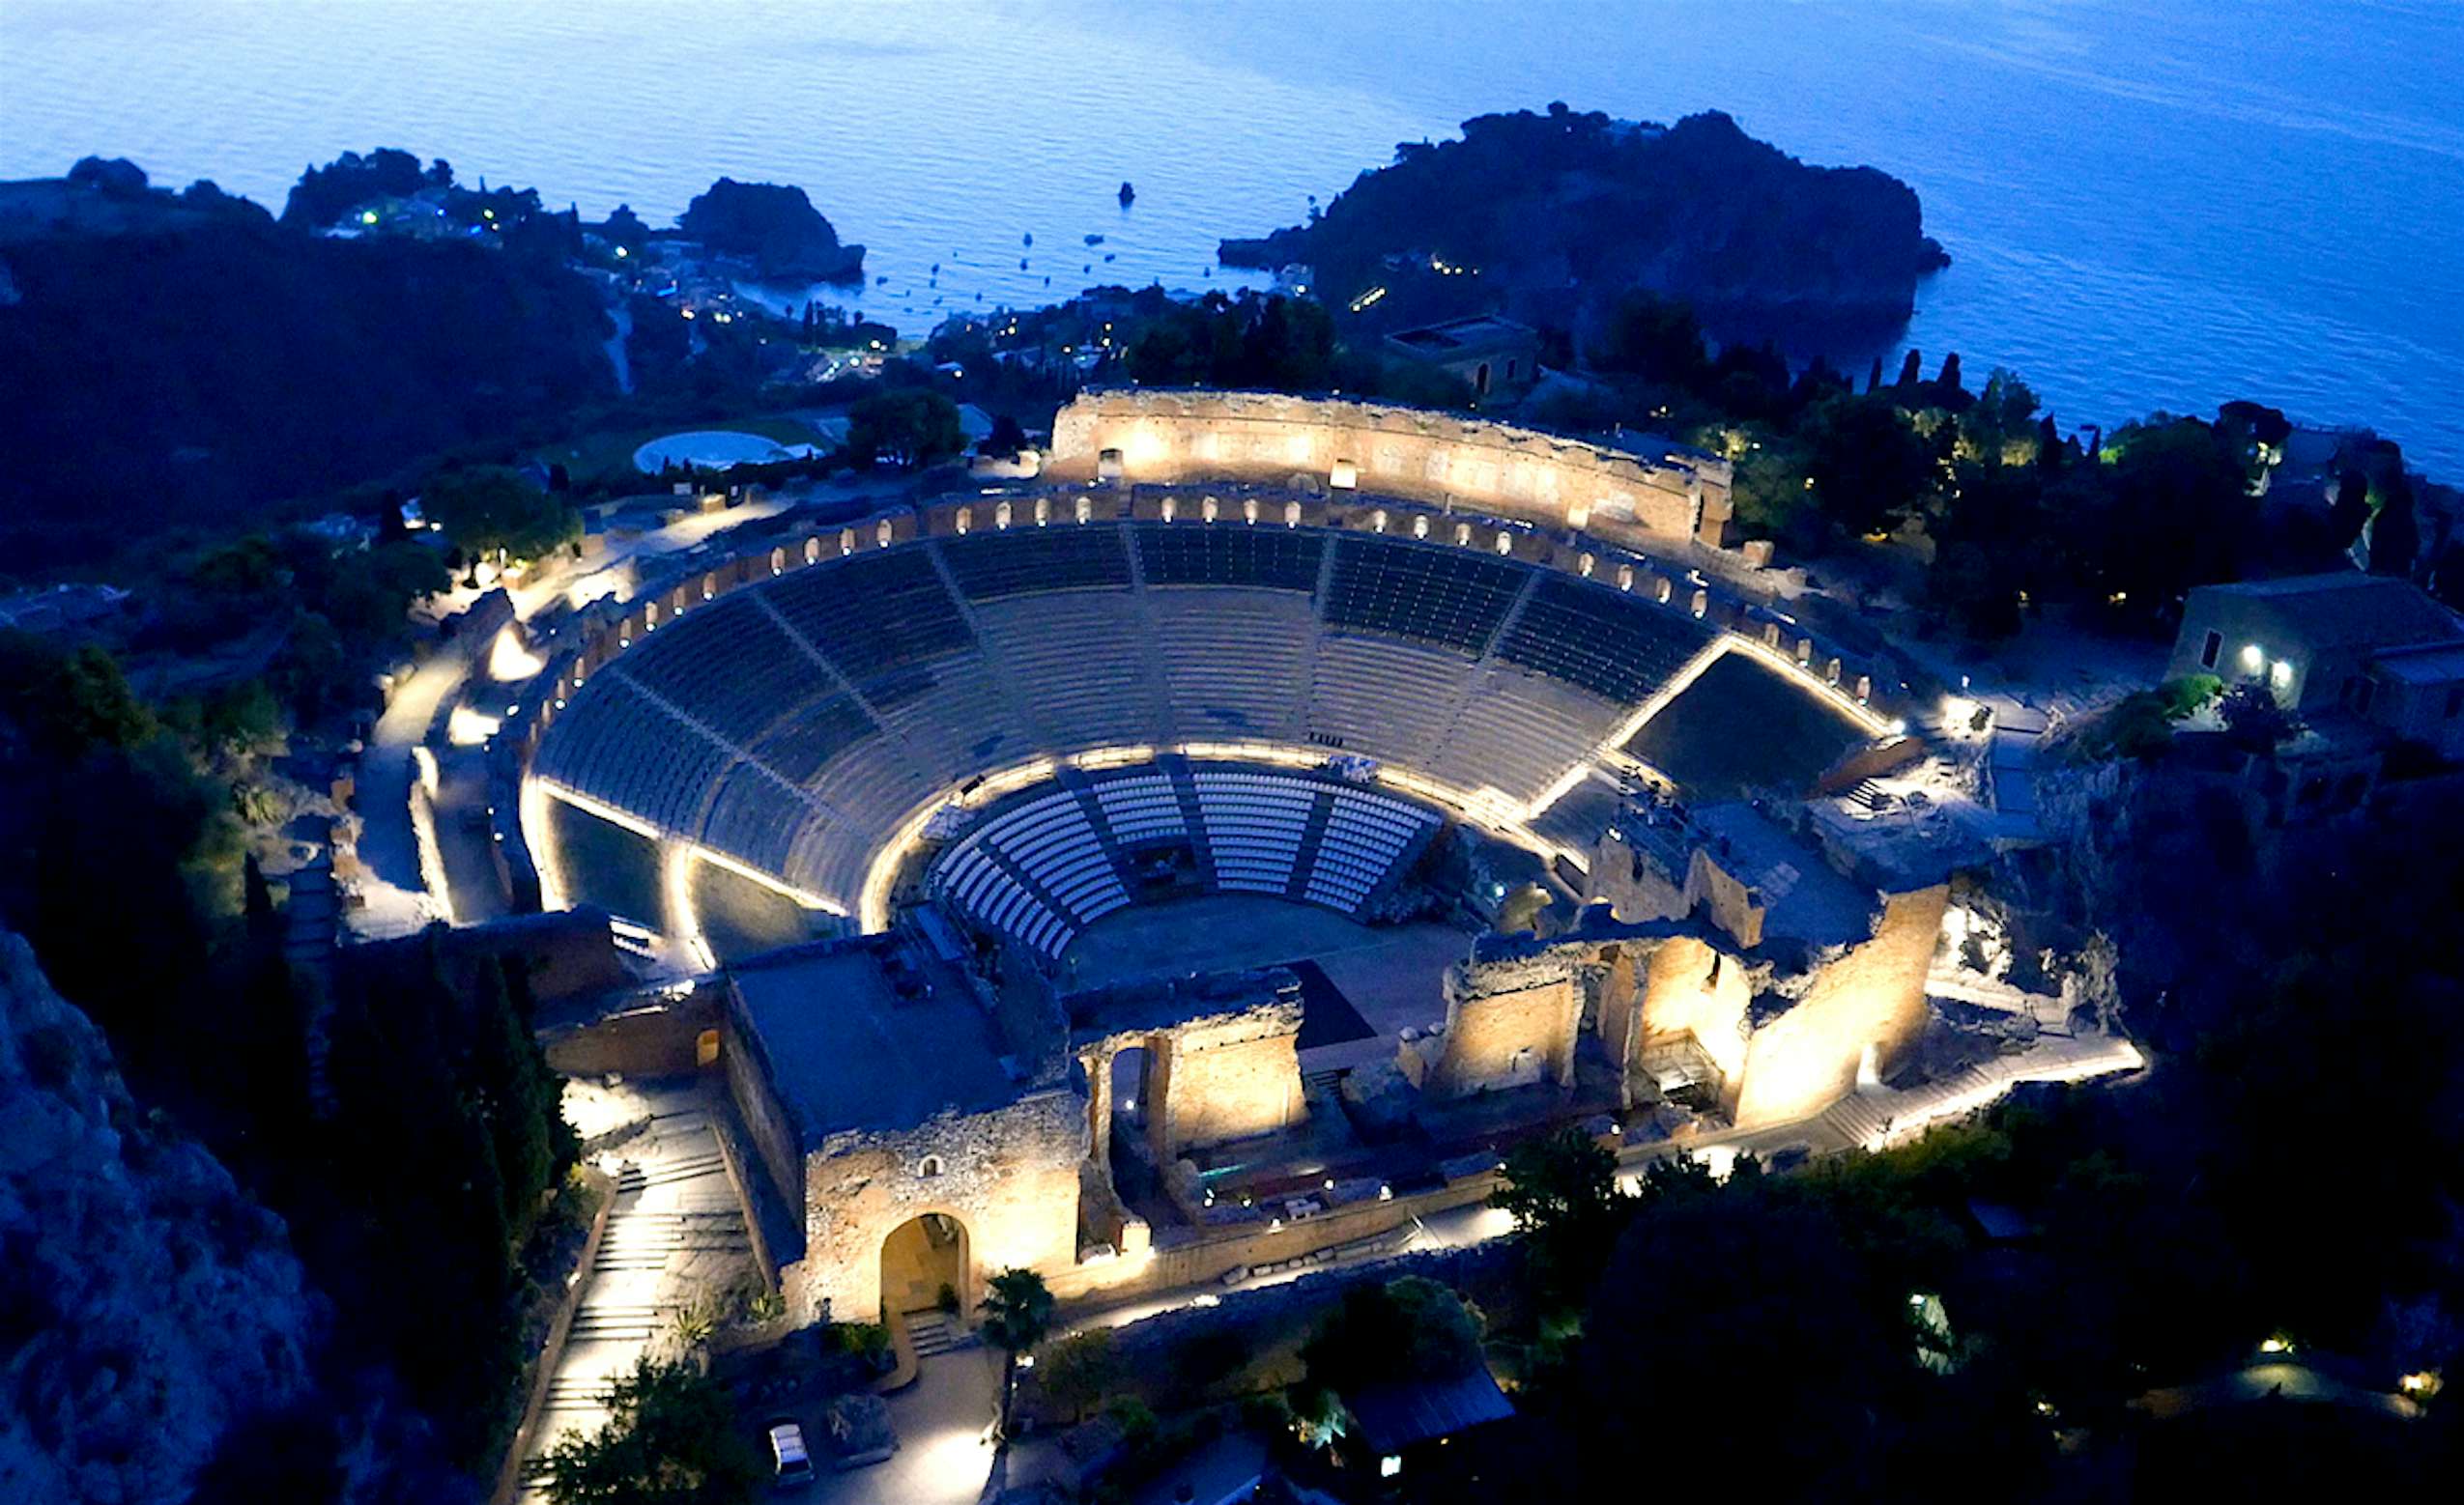 An ancient Greek theatre in Italy is lighting up to stay open for visitors